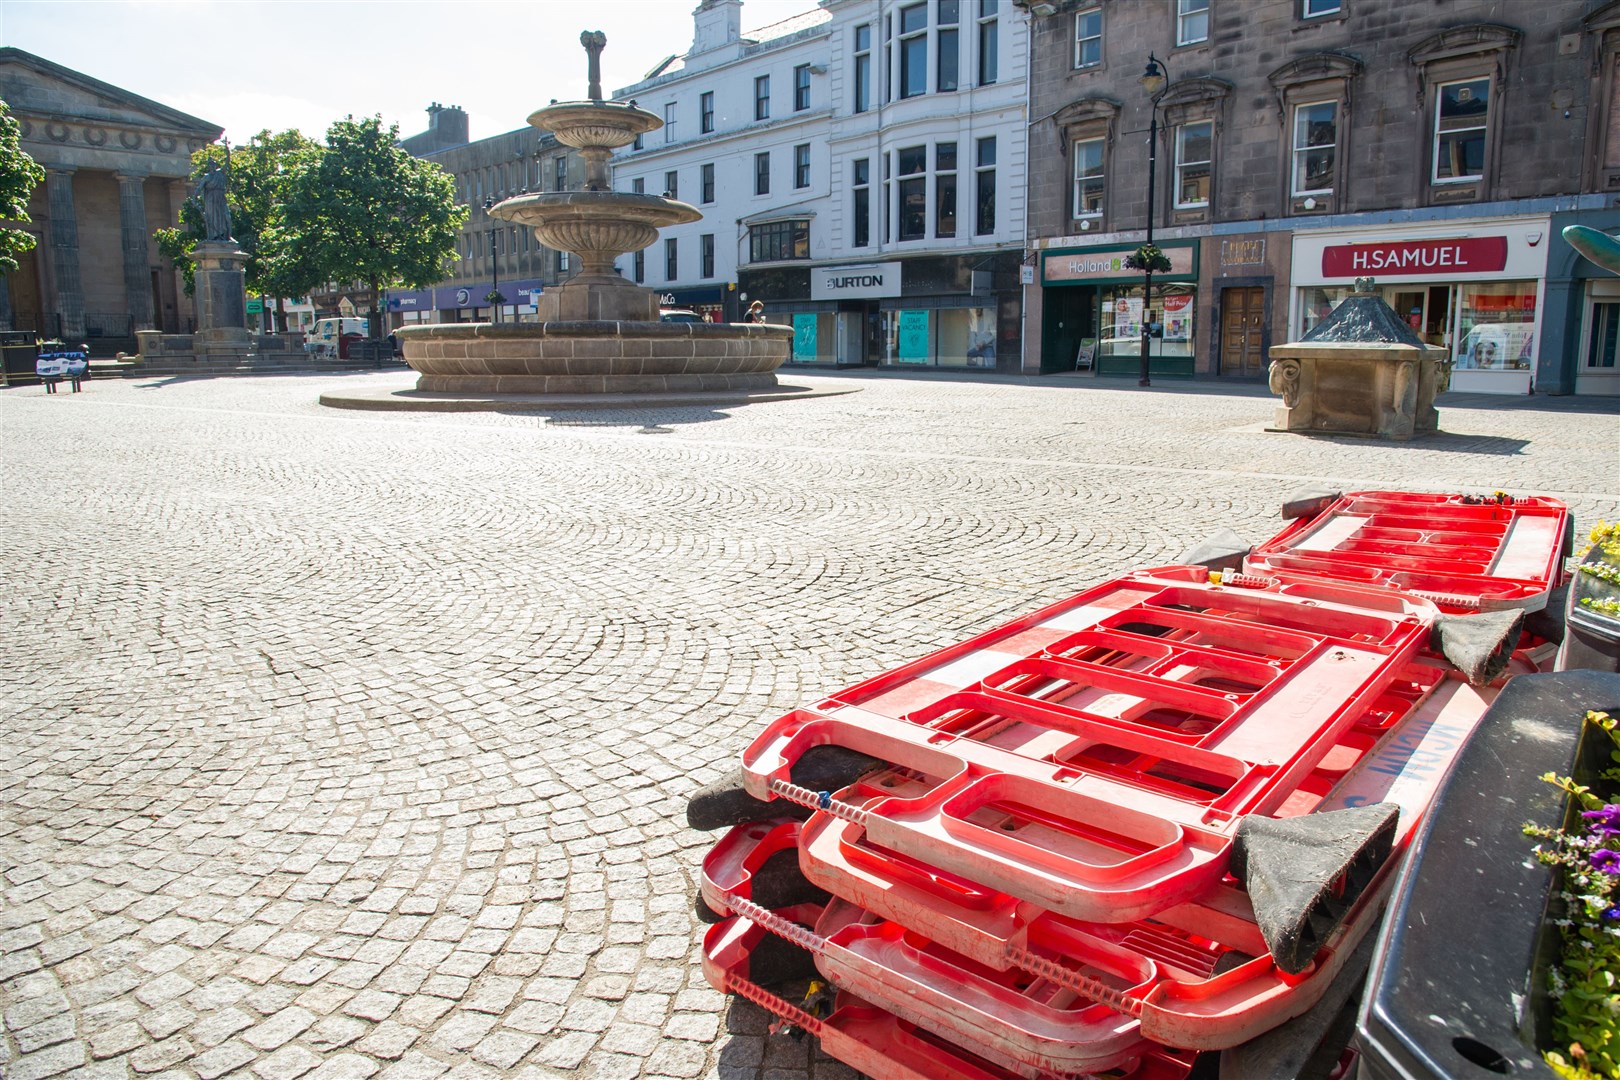 Wooden seating and planting beds have been removed from Elgin High Street, near the Trespass and Poundland stores. Picture: Daniel Forsyth.